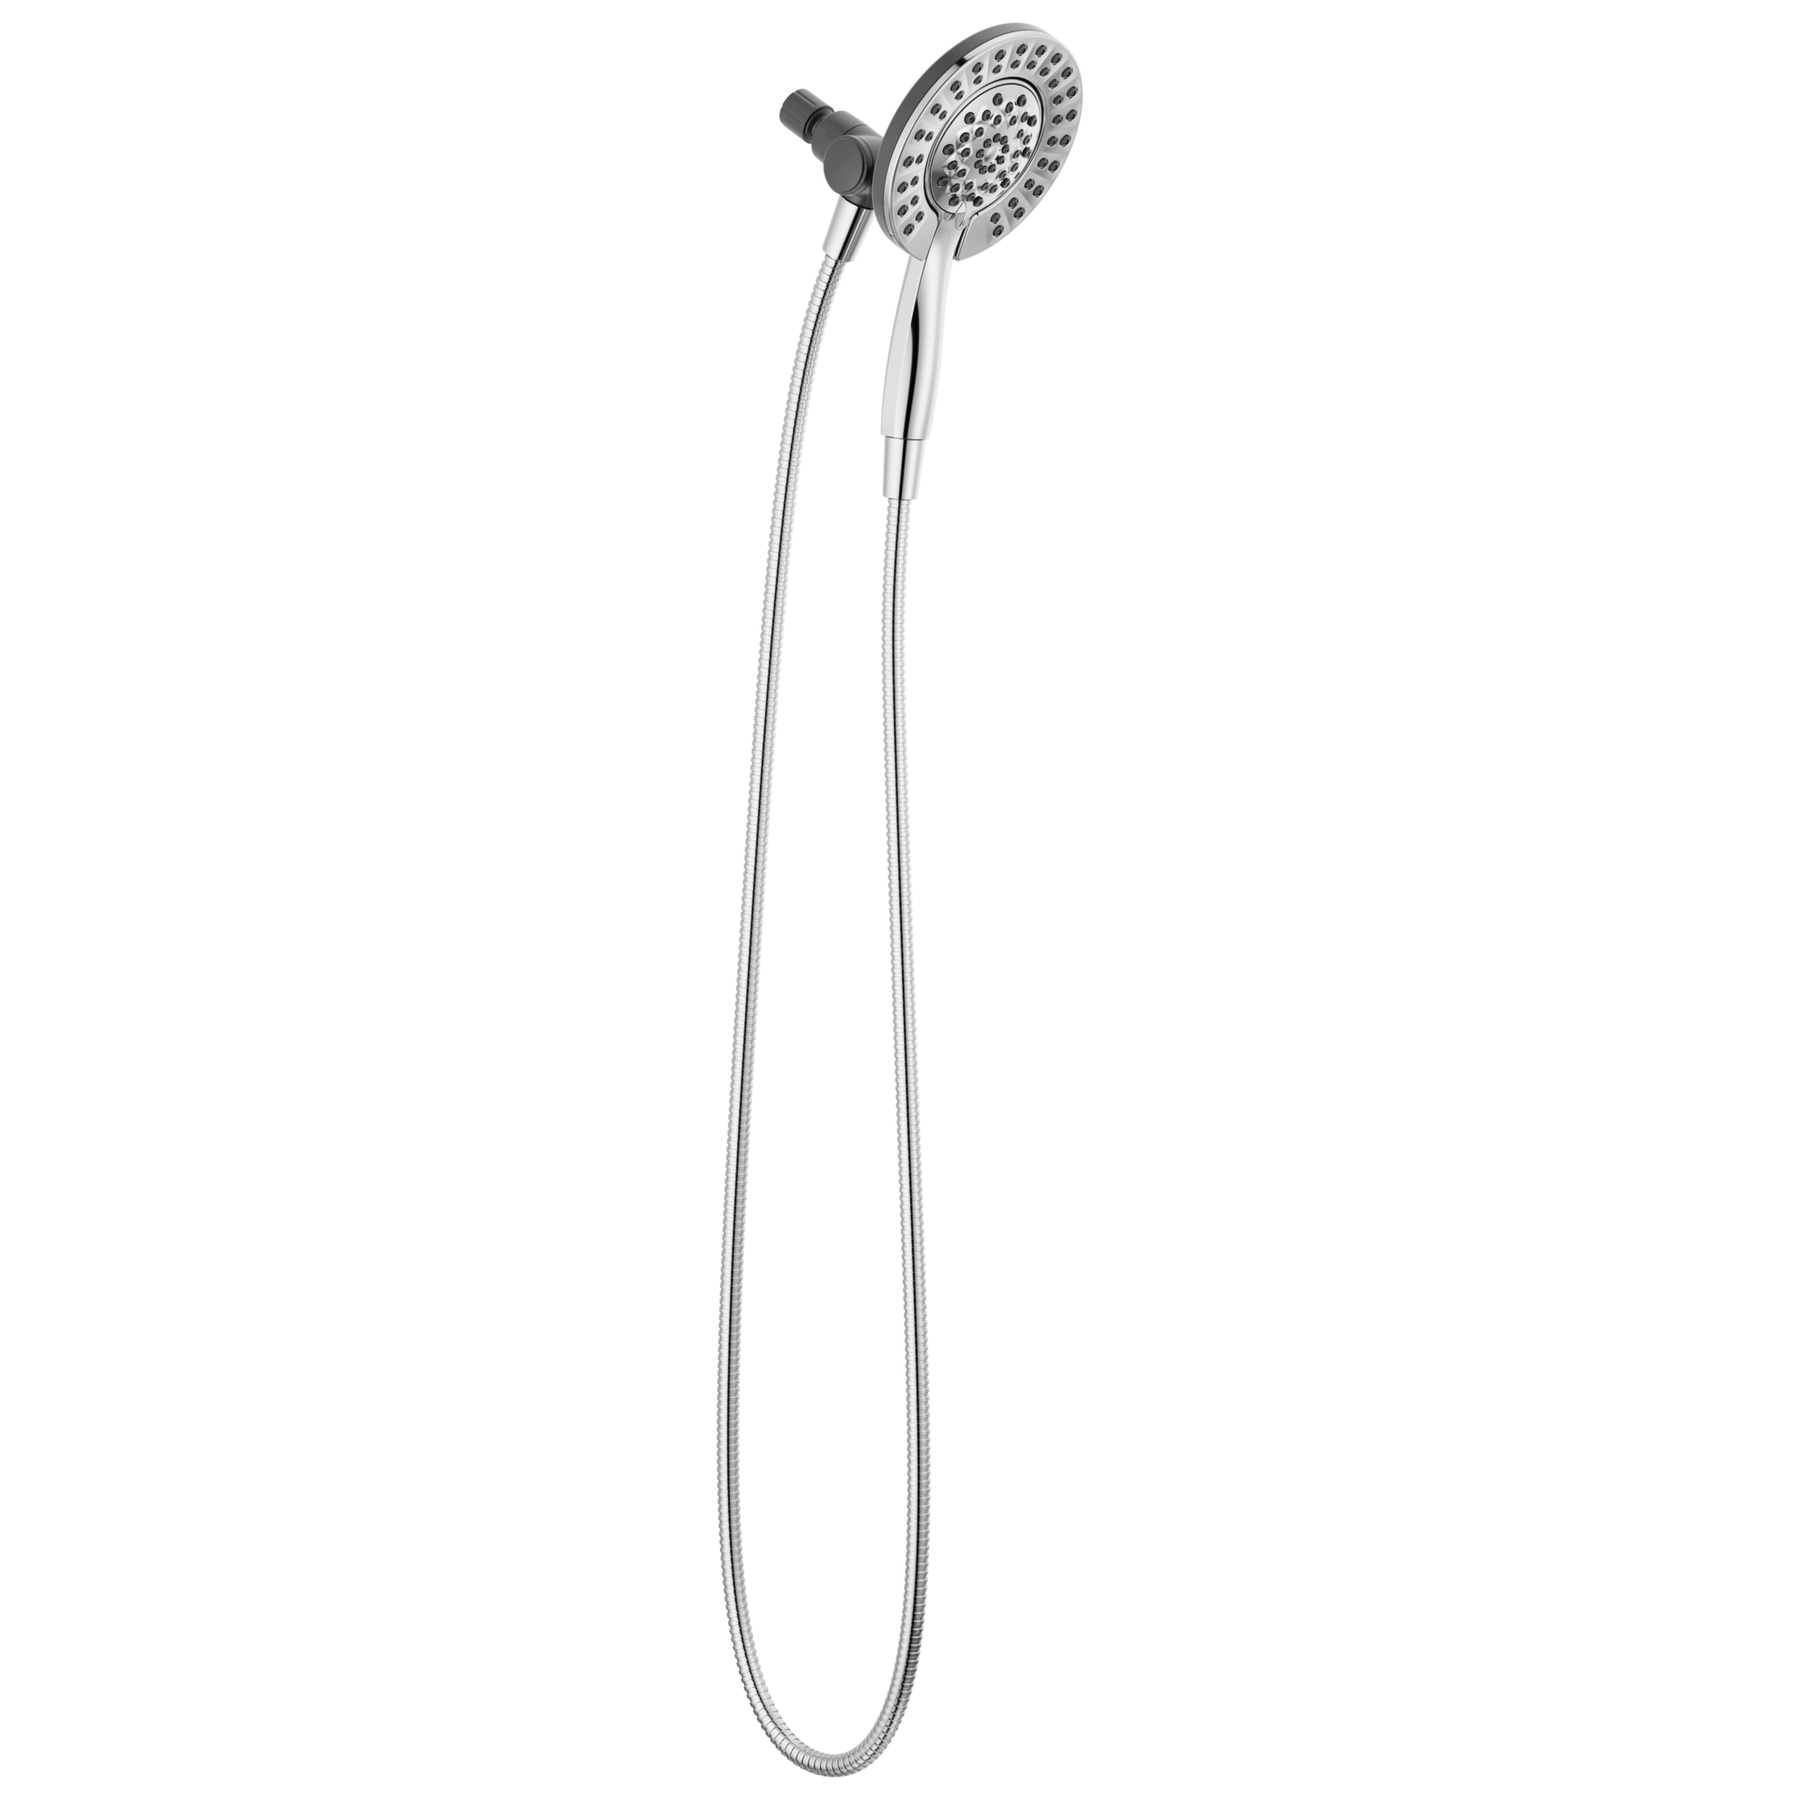 Delta In2ition Dual Shower Head 1.75 GPM 4-Setting 75955 - image 1 of 6